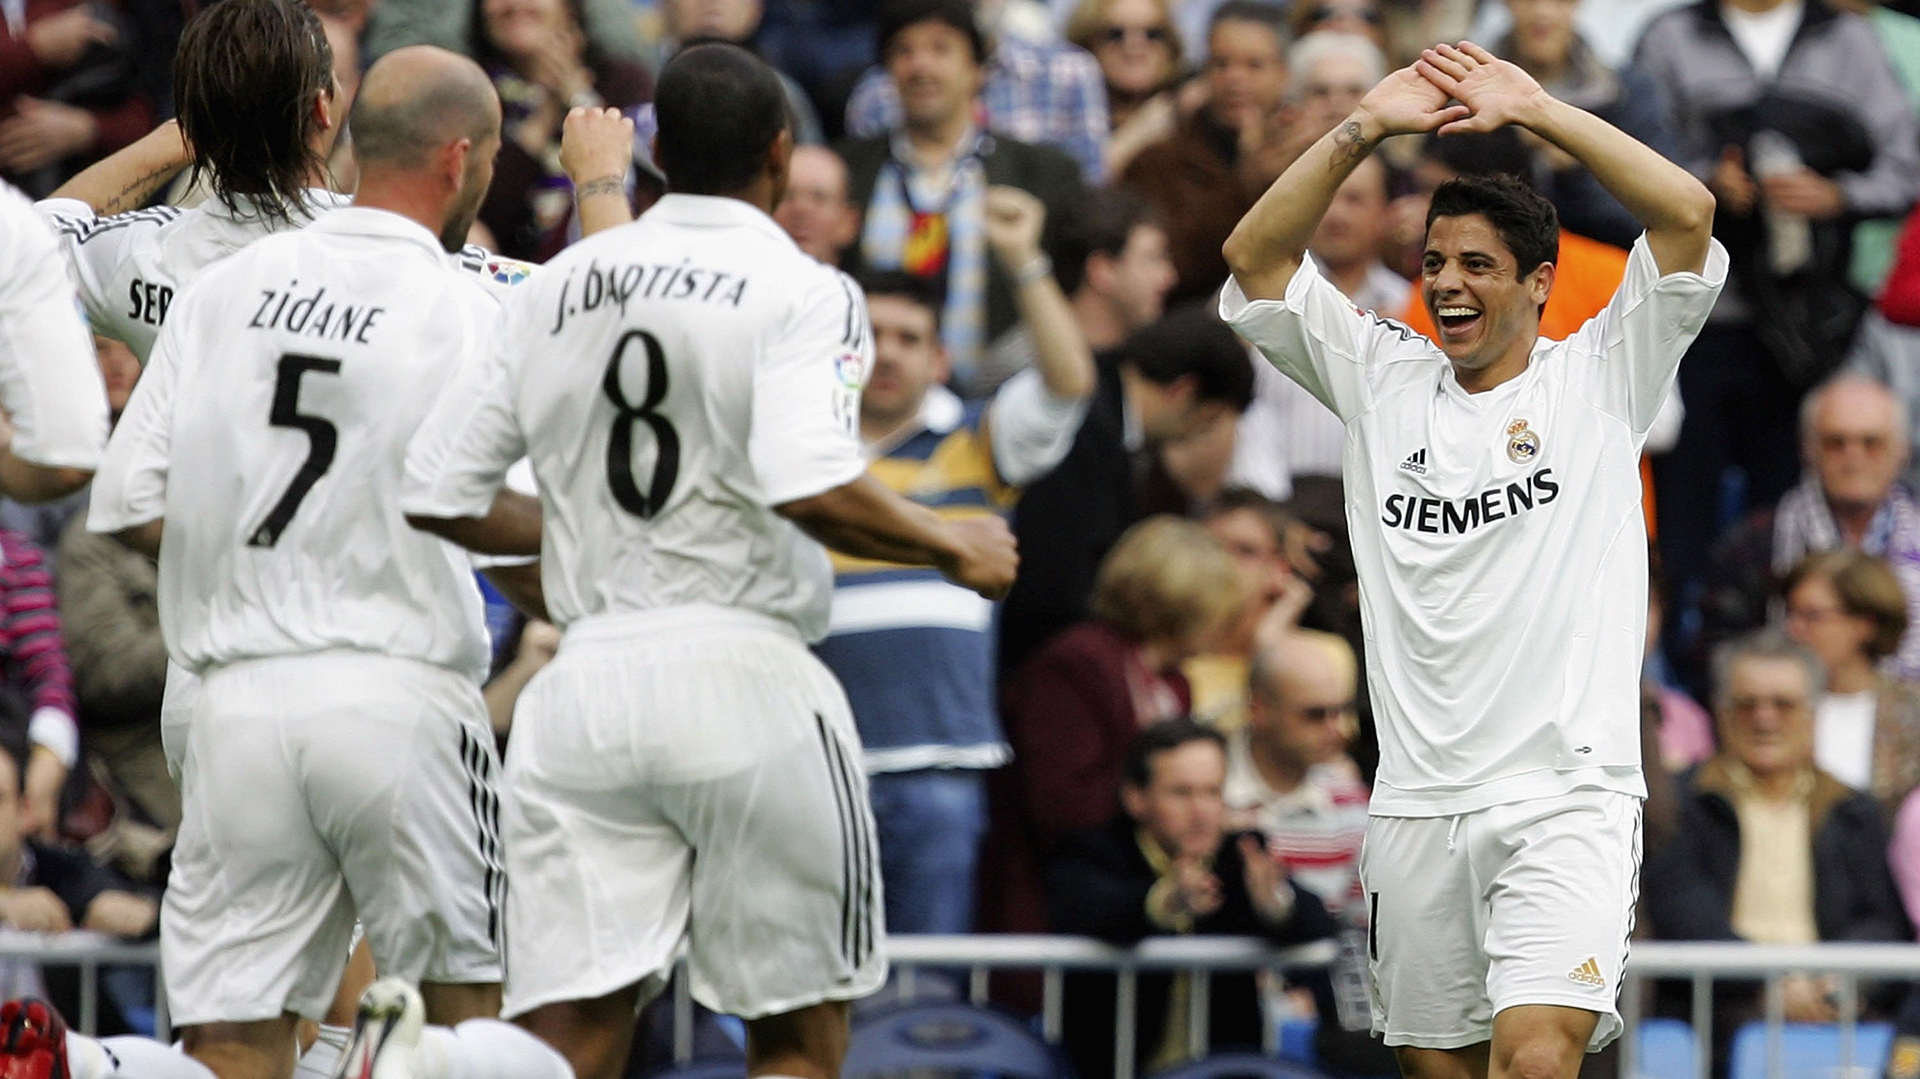 Cicinho scored three goals with the Real Madrid shirt (Getty)